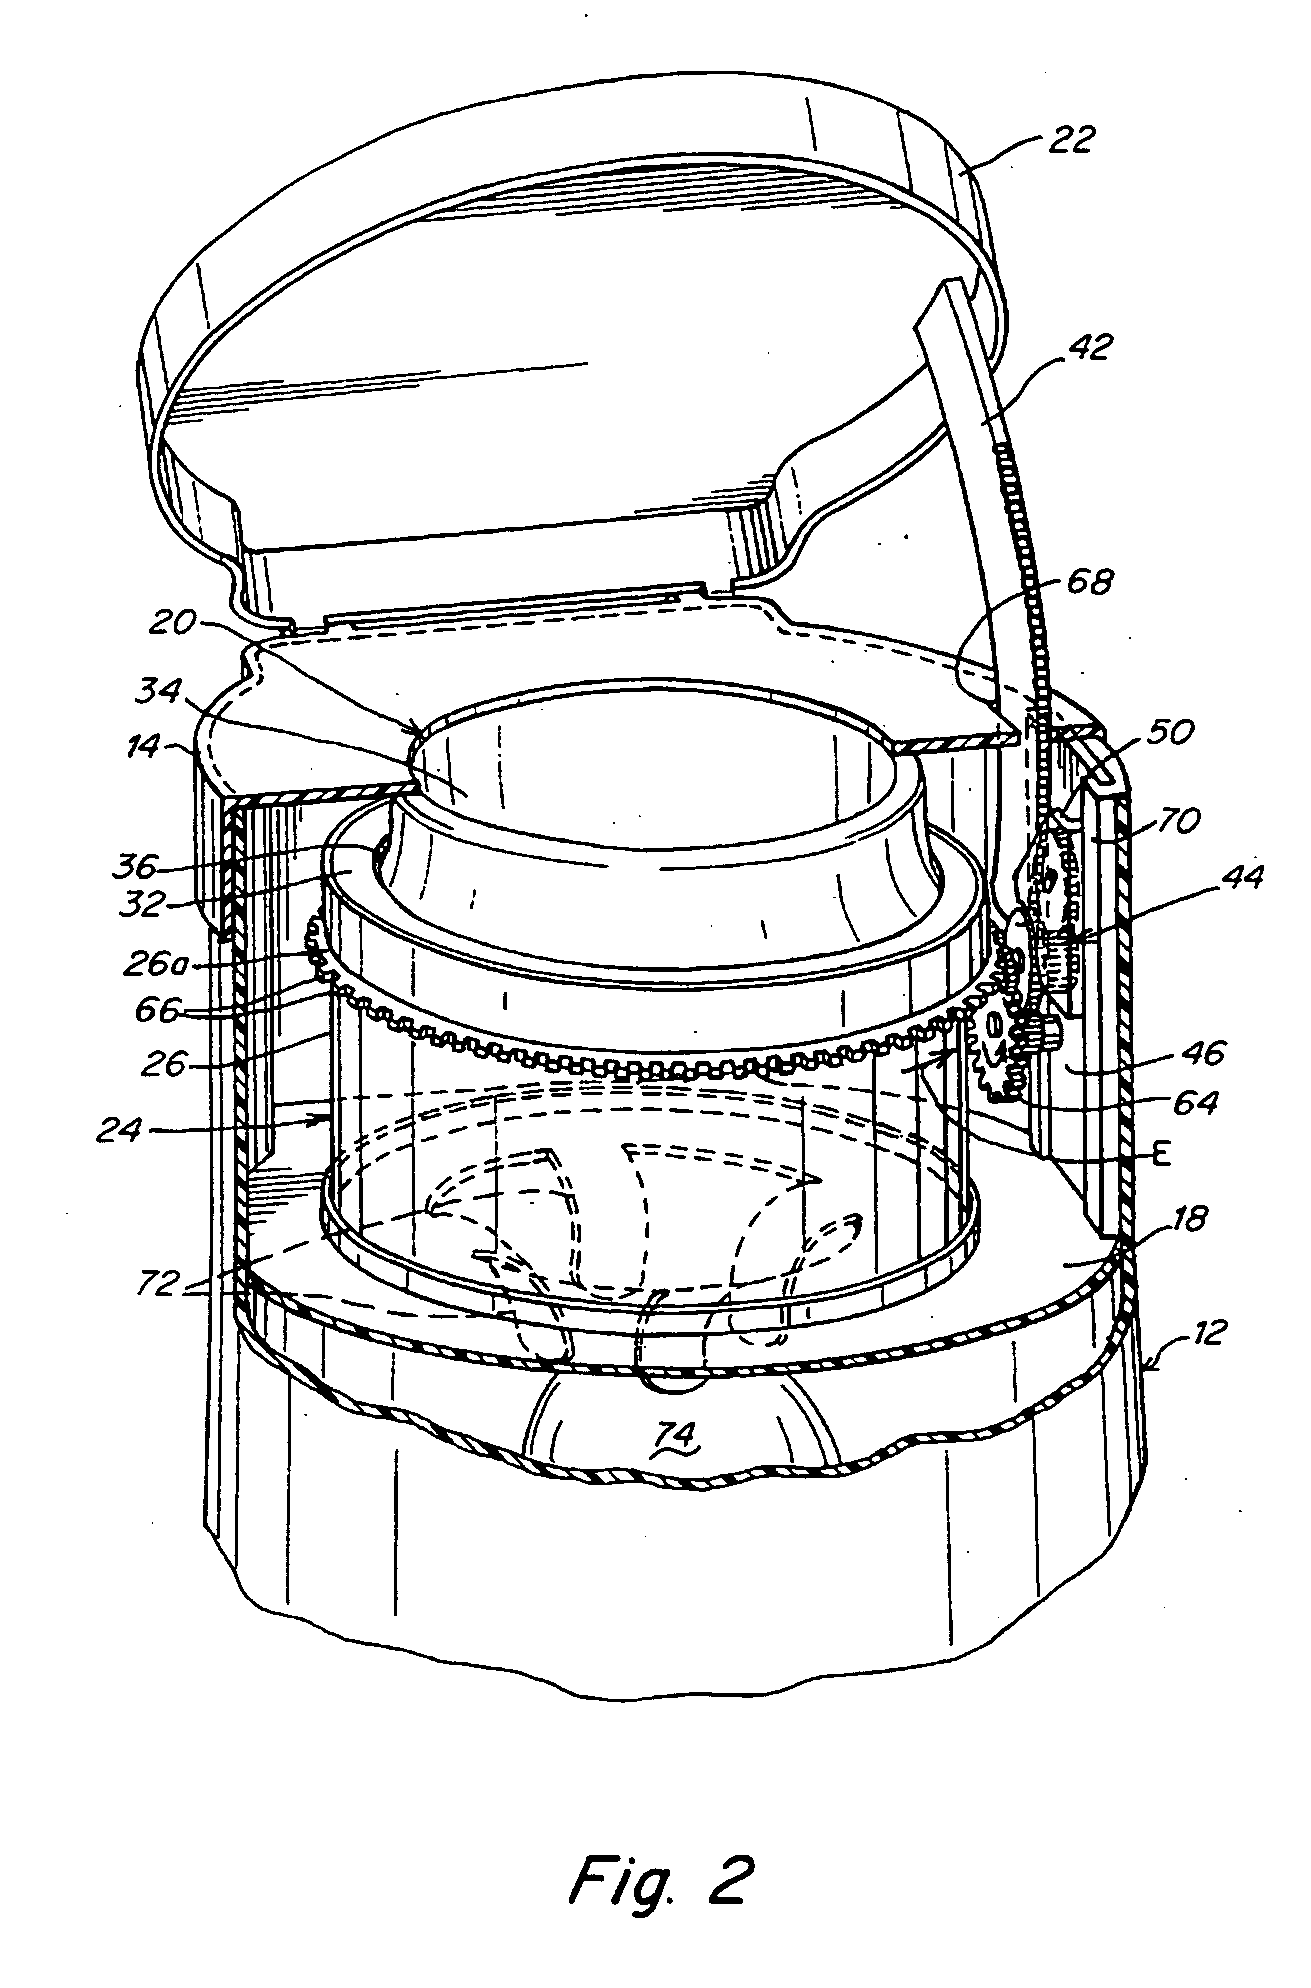 Waste disposal device including a film cutting and sealing device